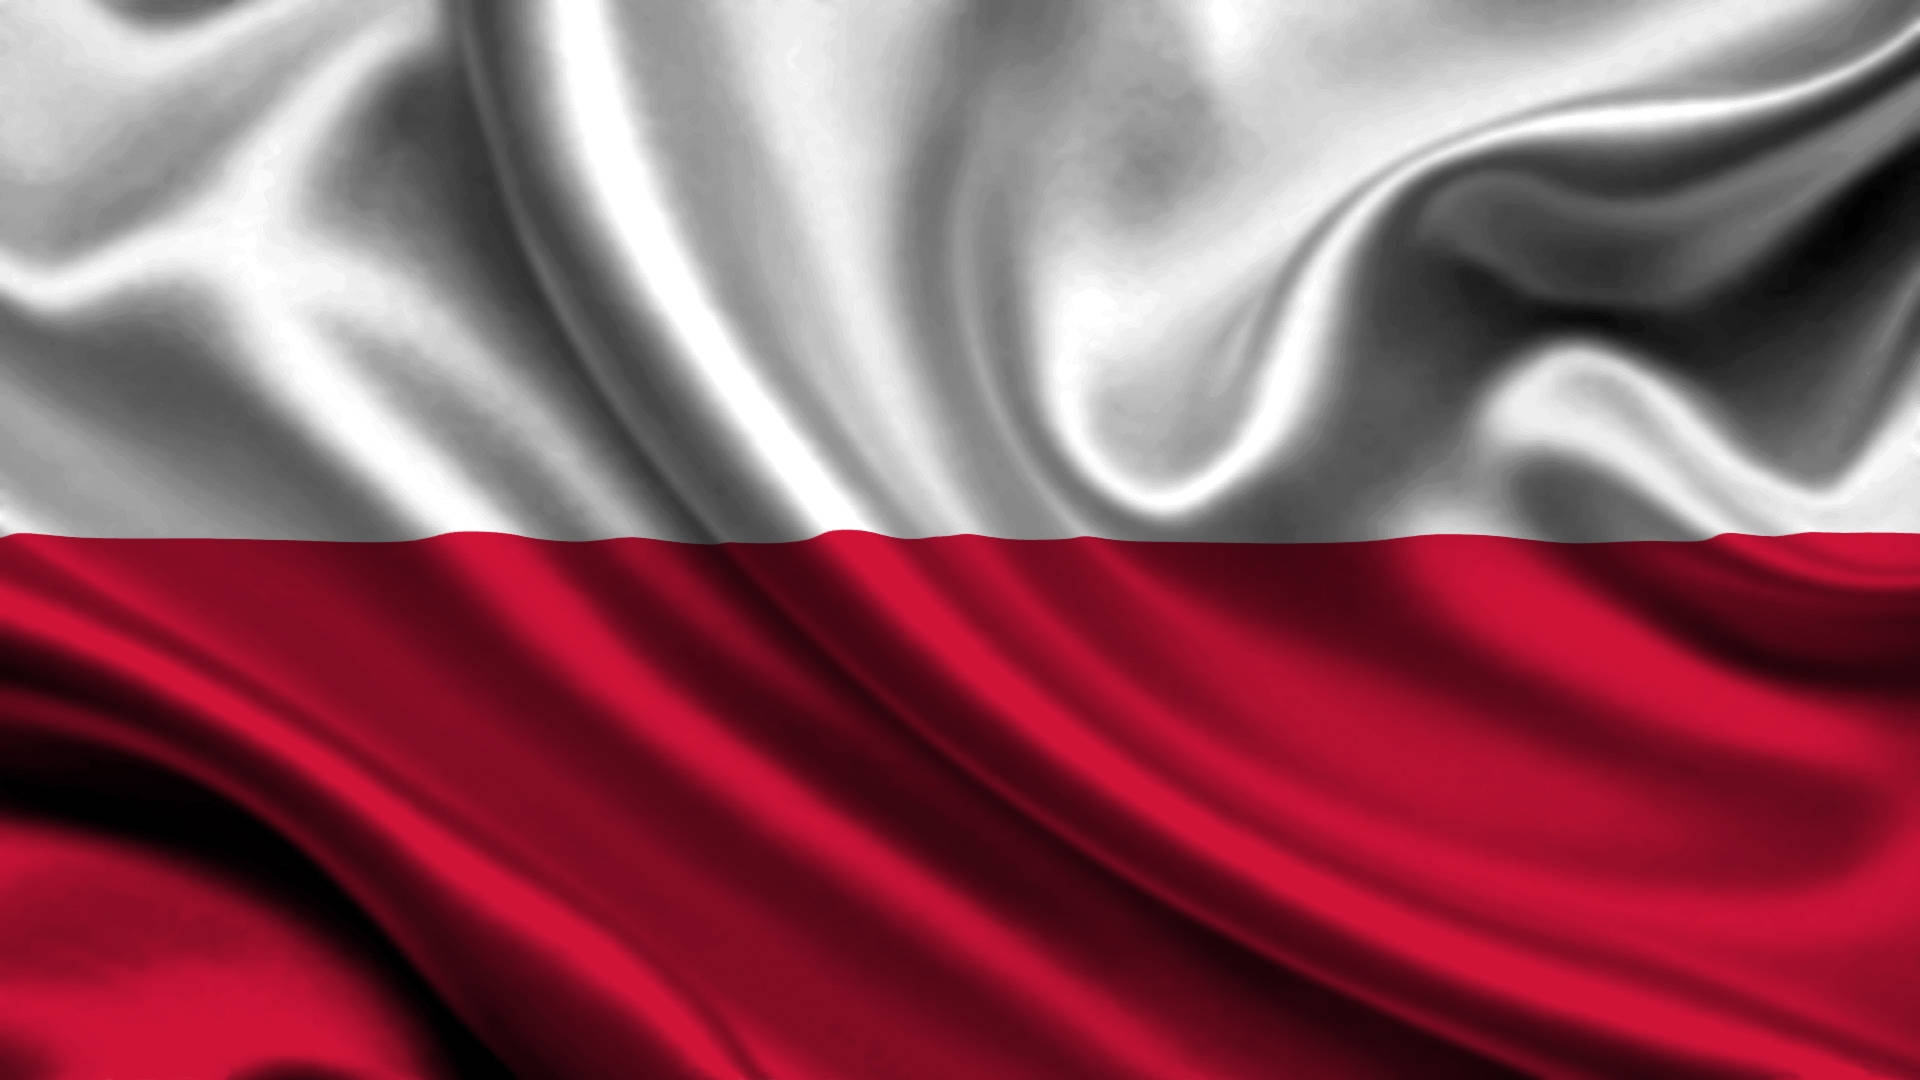 The Glorious Flag Of Poland Unfurled